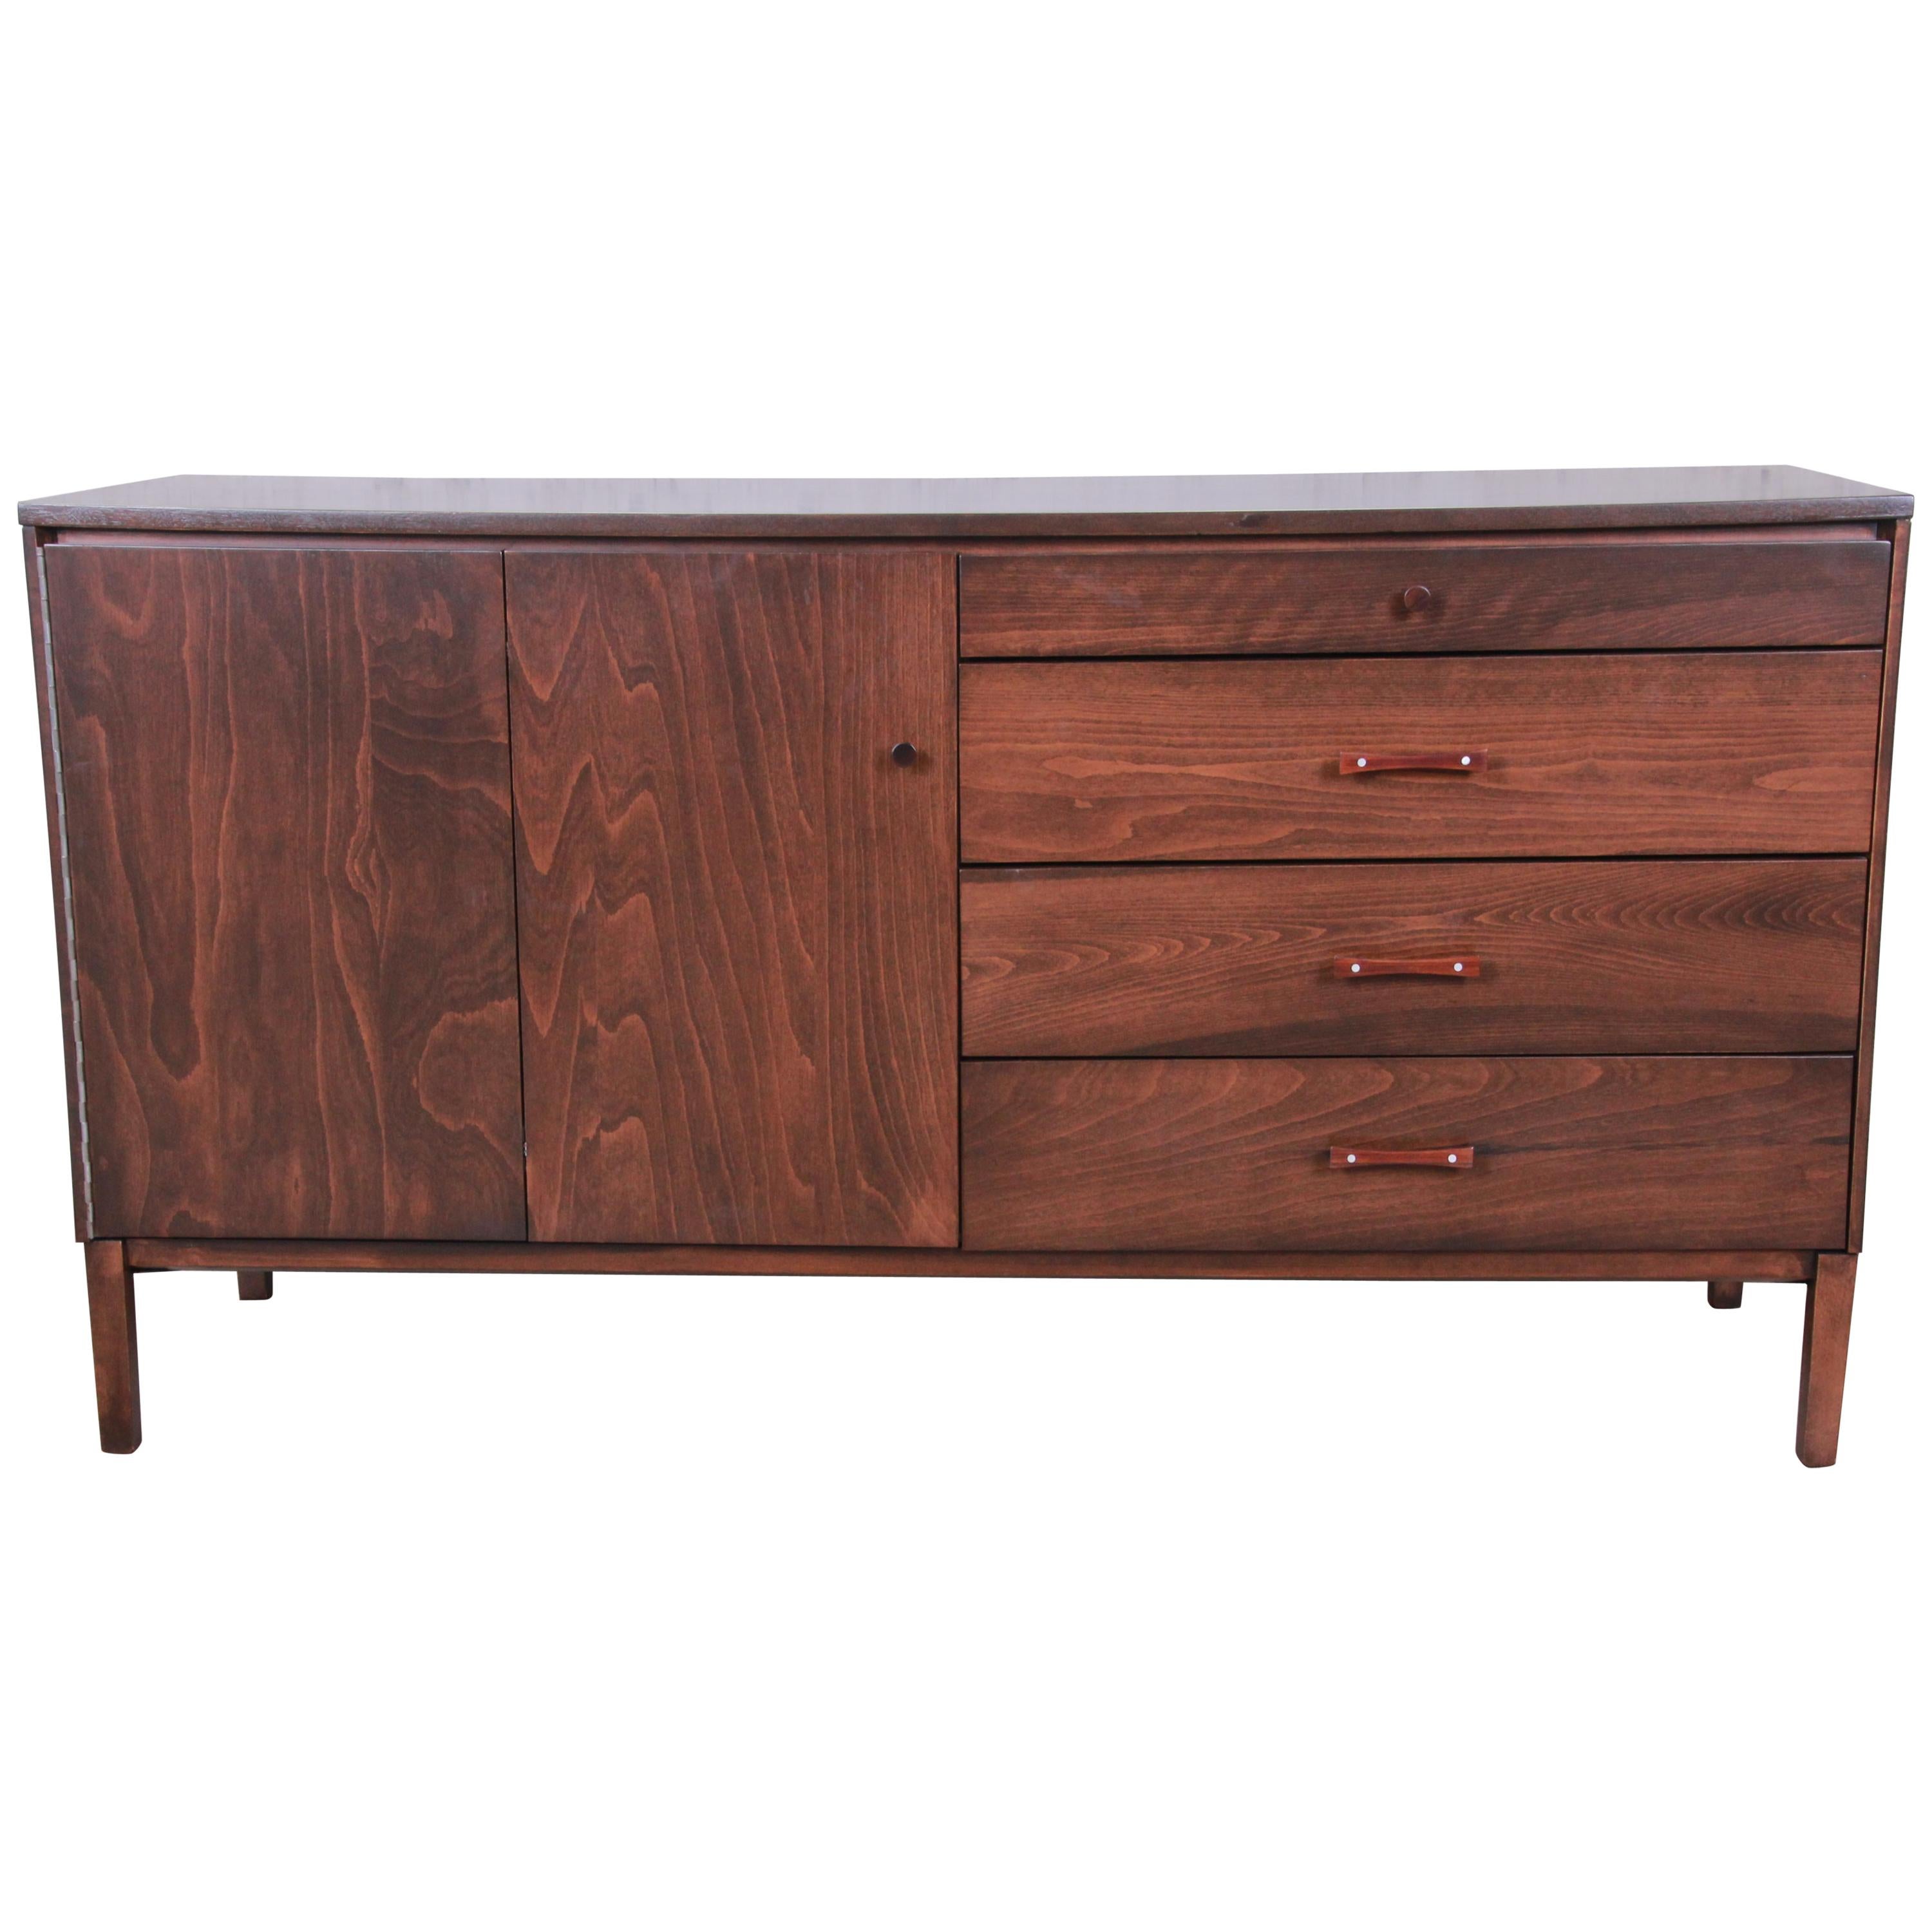 Paul McCobb Perimeter Group Credenza, Newly Refinished